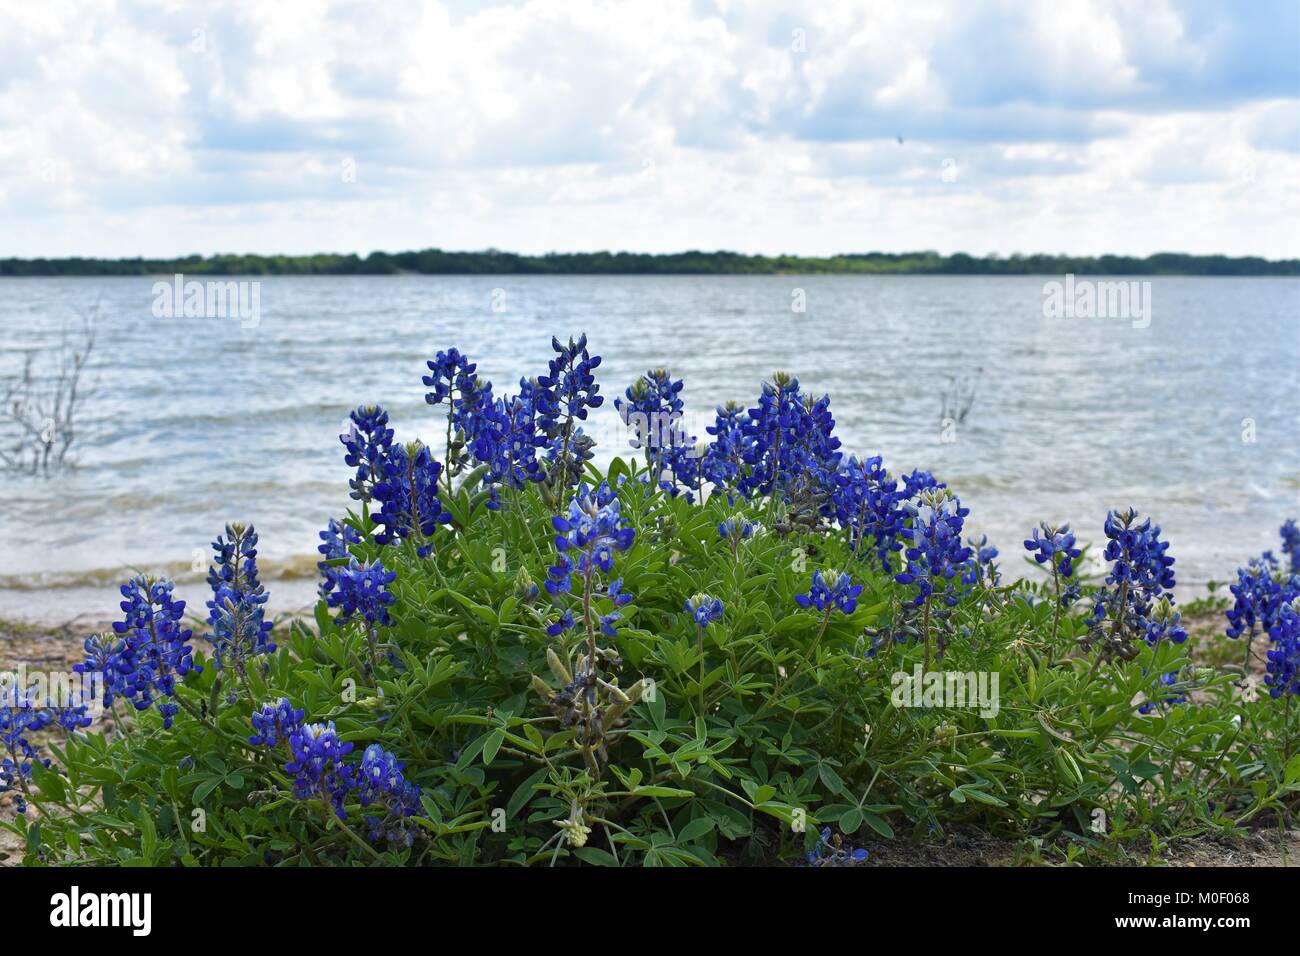 Bluebonnets by the lake Stock Photo